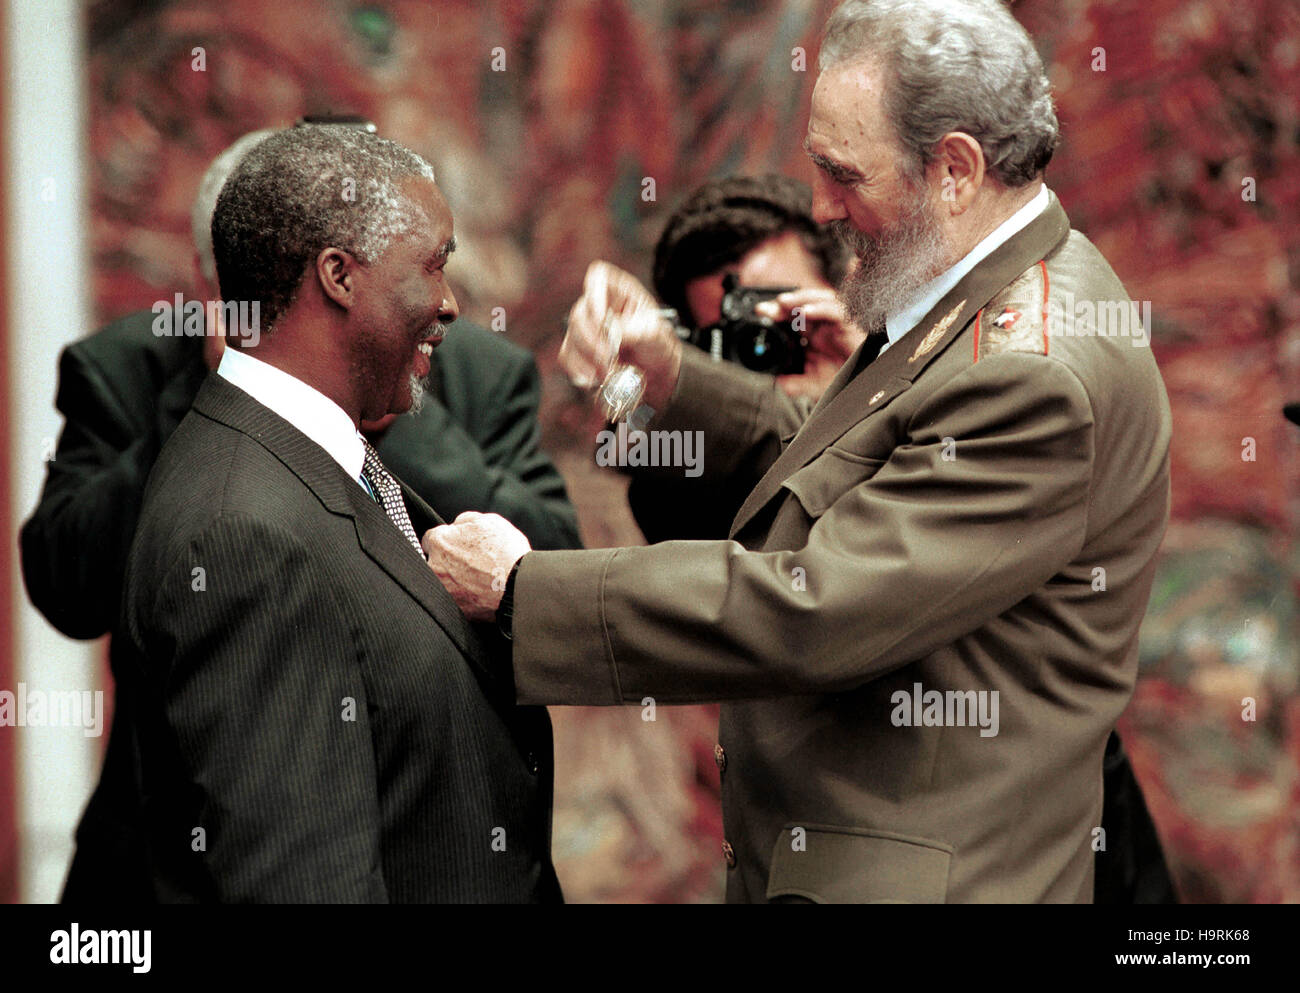 Cuban President Fidel Castro, right, presents South African President Thabo Mbeki with the Order of Jose Marti medal, Cuba´s highest honor, March 28, 2001 in the Palace of the Revolution in Havana, Cuba. Credit: Jorge Rey/MediaPunch Stock Photo